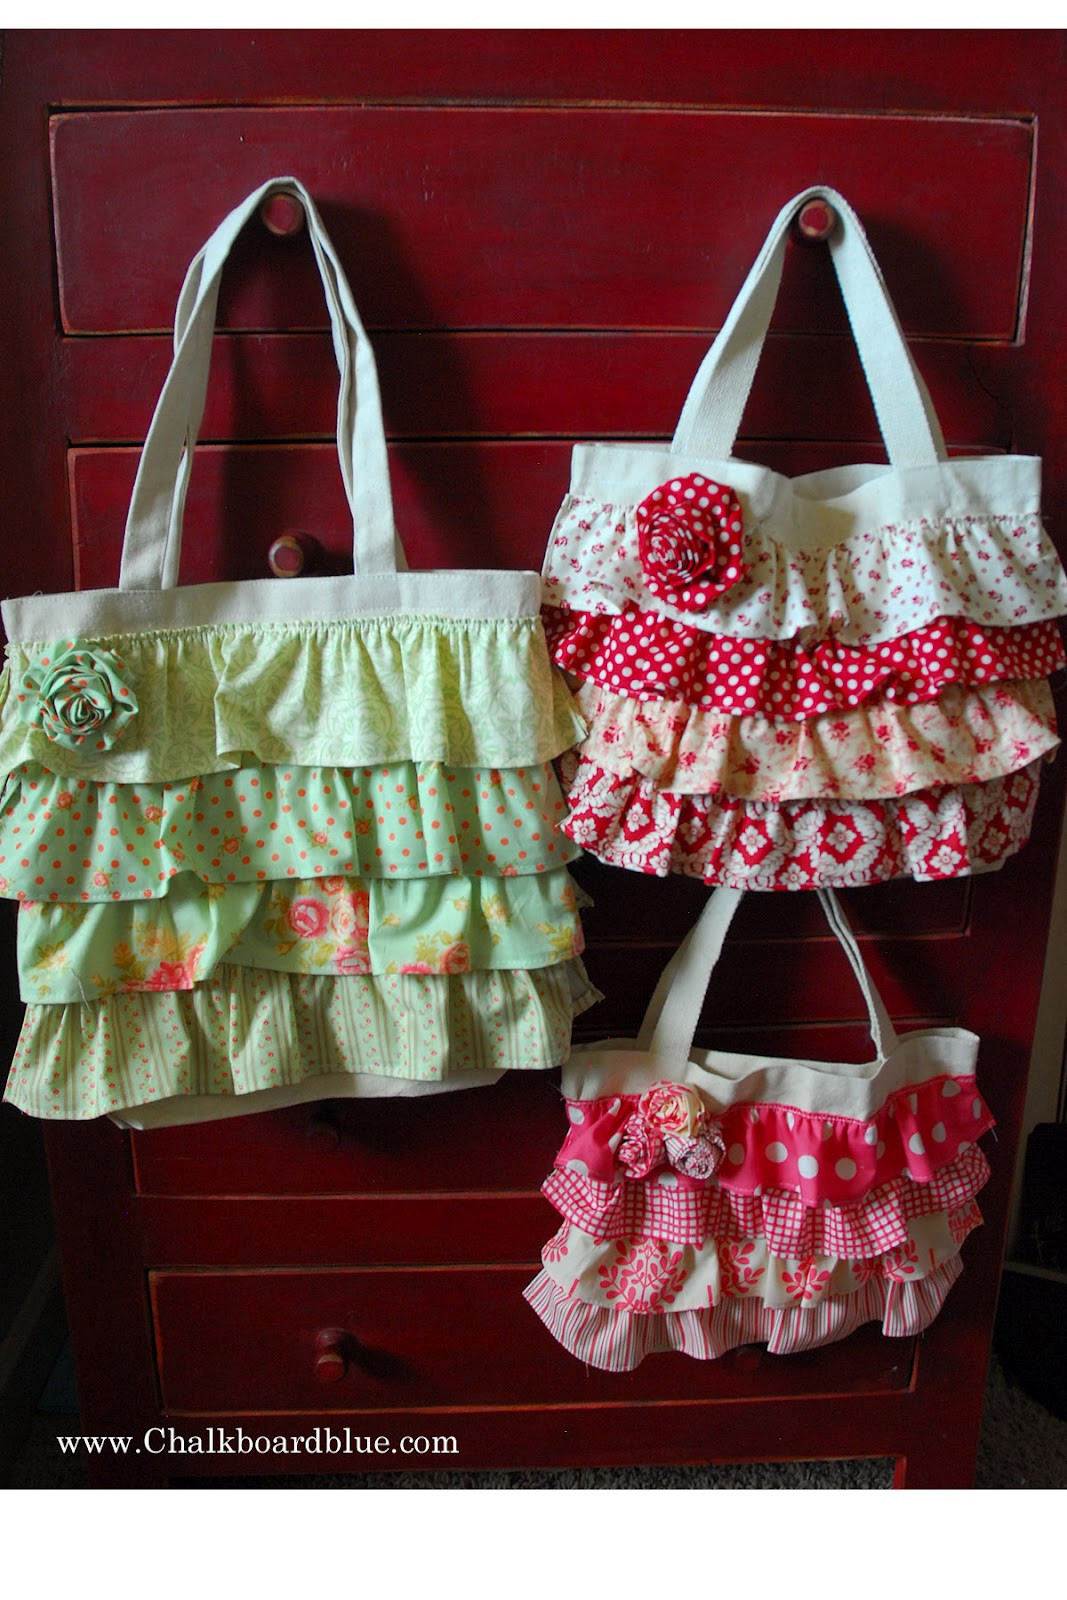 Best ideas about DIY Tote Bag
. Save or Pin Chalkboard Blue Let s Bag it DIY canvas tote bags Now.